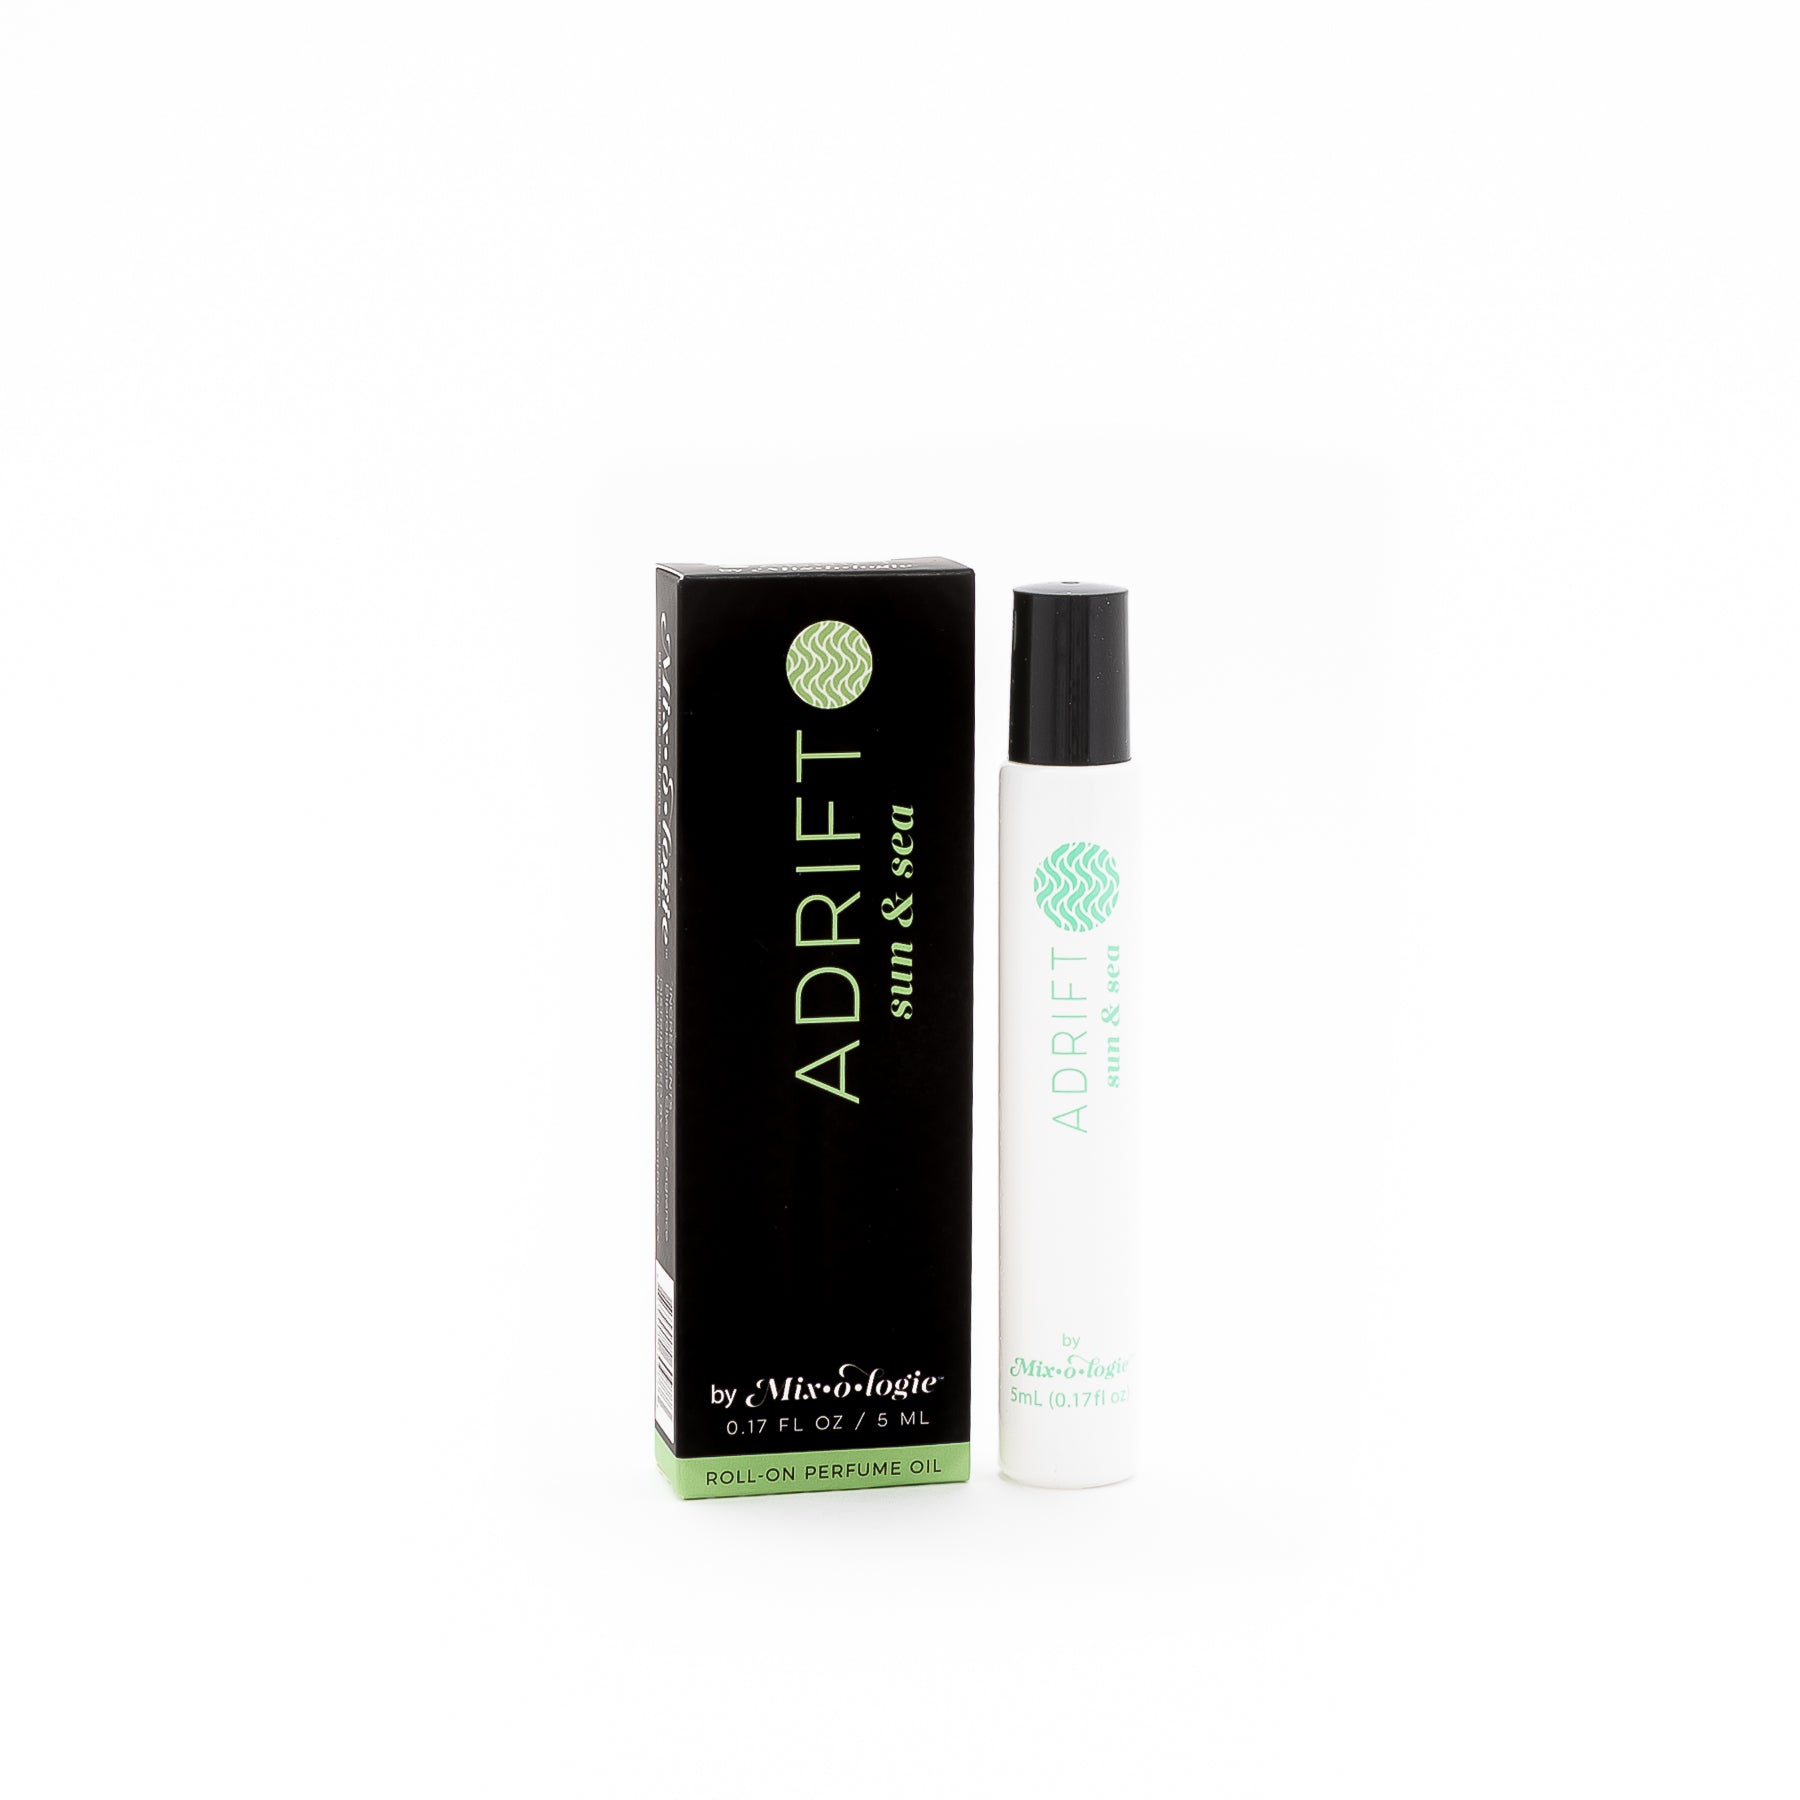 Adrift (Sun & Sea) White cylinder rollerball with light green color lettering with black box and light green color lettering. Rollerball has 0.17 fl oz or 5 mL. Rollerball and rollerball box are on white background 